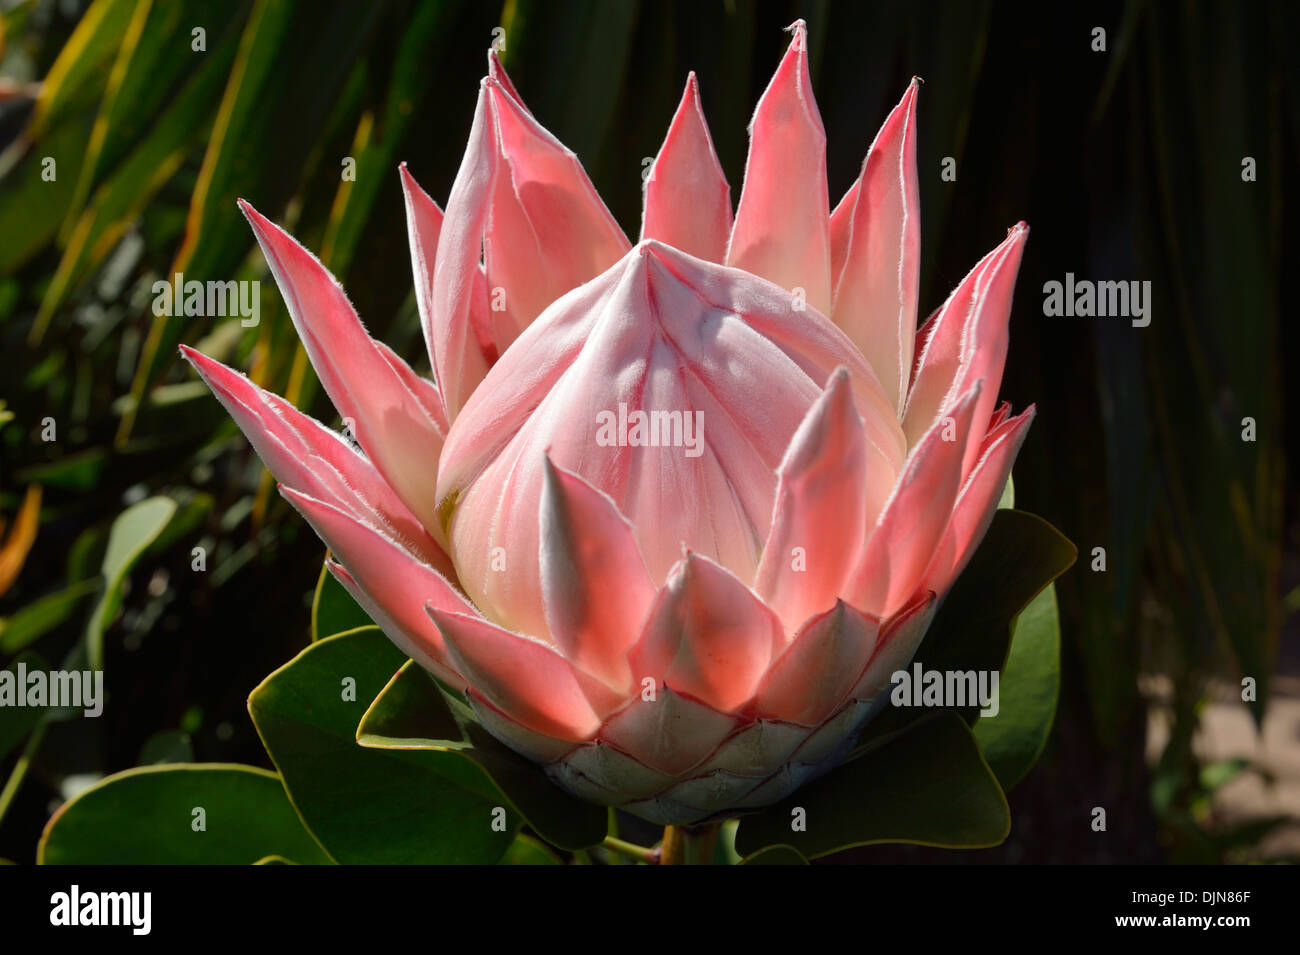 Giant Protea South African national flower Garajonay National Park Visitor Centre La Gomera Canary Islands Spain Stock Photo